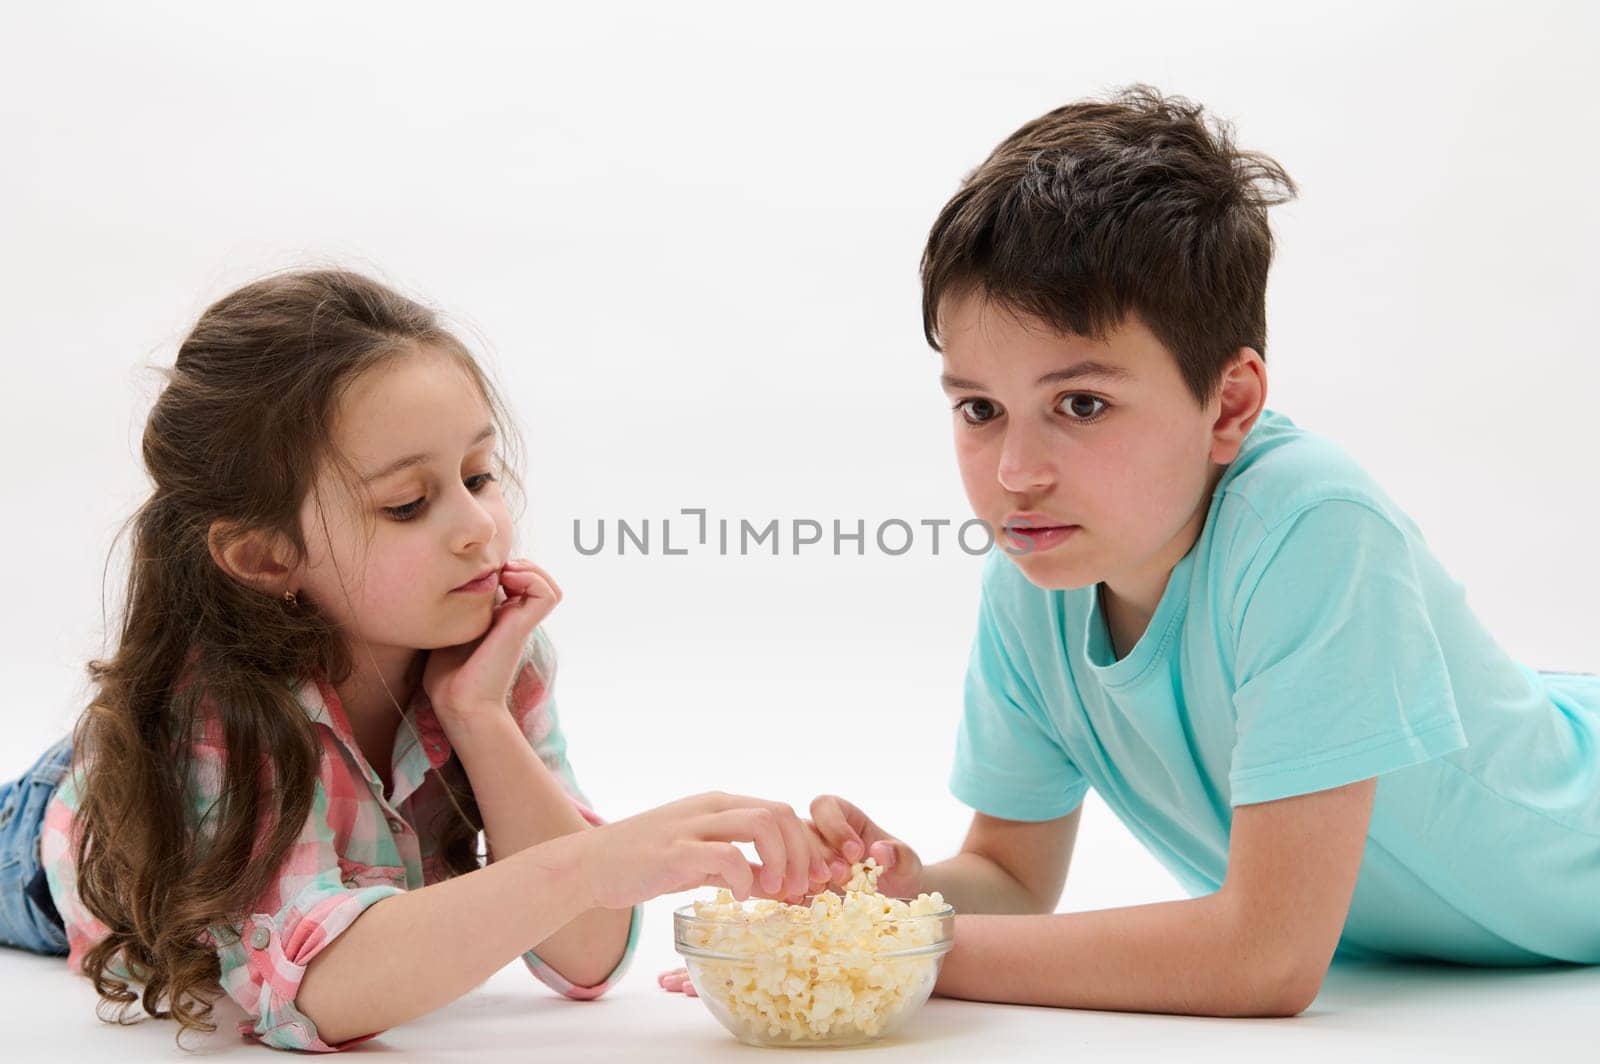 Beautiful primary school children, lovely little kid girl in pink blue plaid shirt and her older brother, pre teen charming boy in t-shirt, lying on belly, eating popcorn on isolated white background.